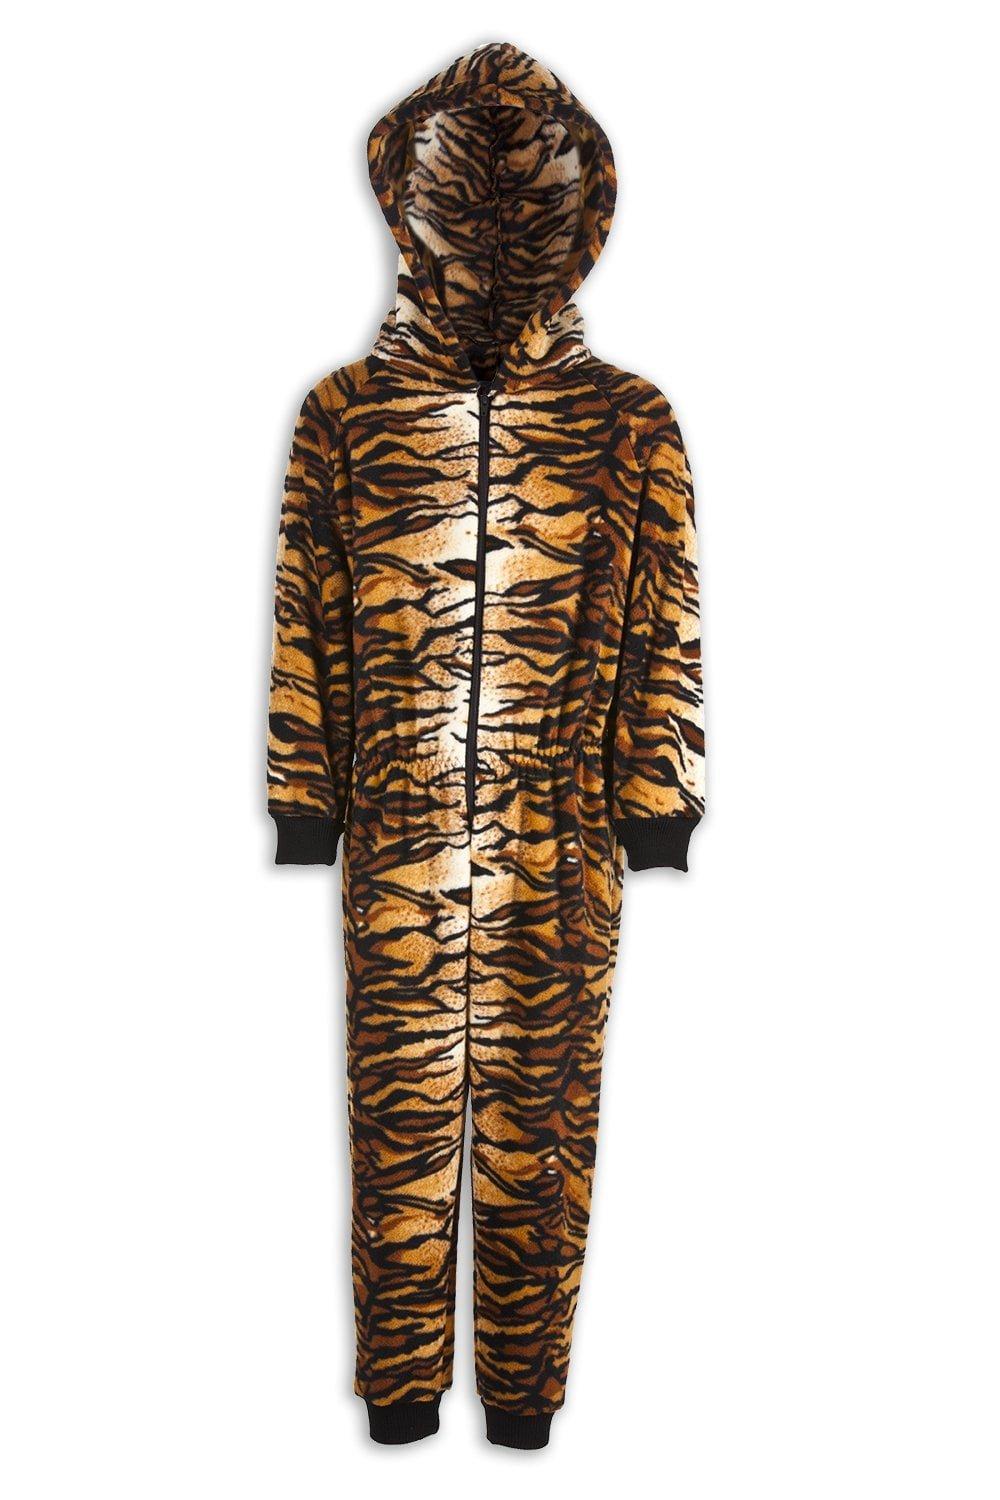 Supersoft Tiger Print Hooded All In One Onesie